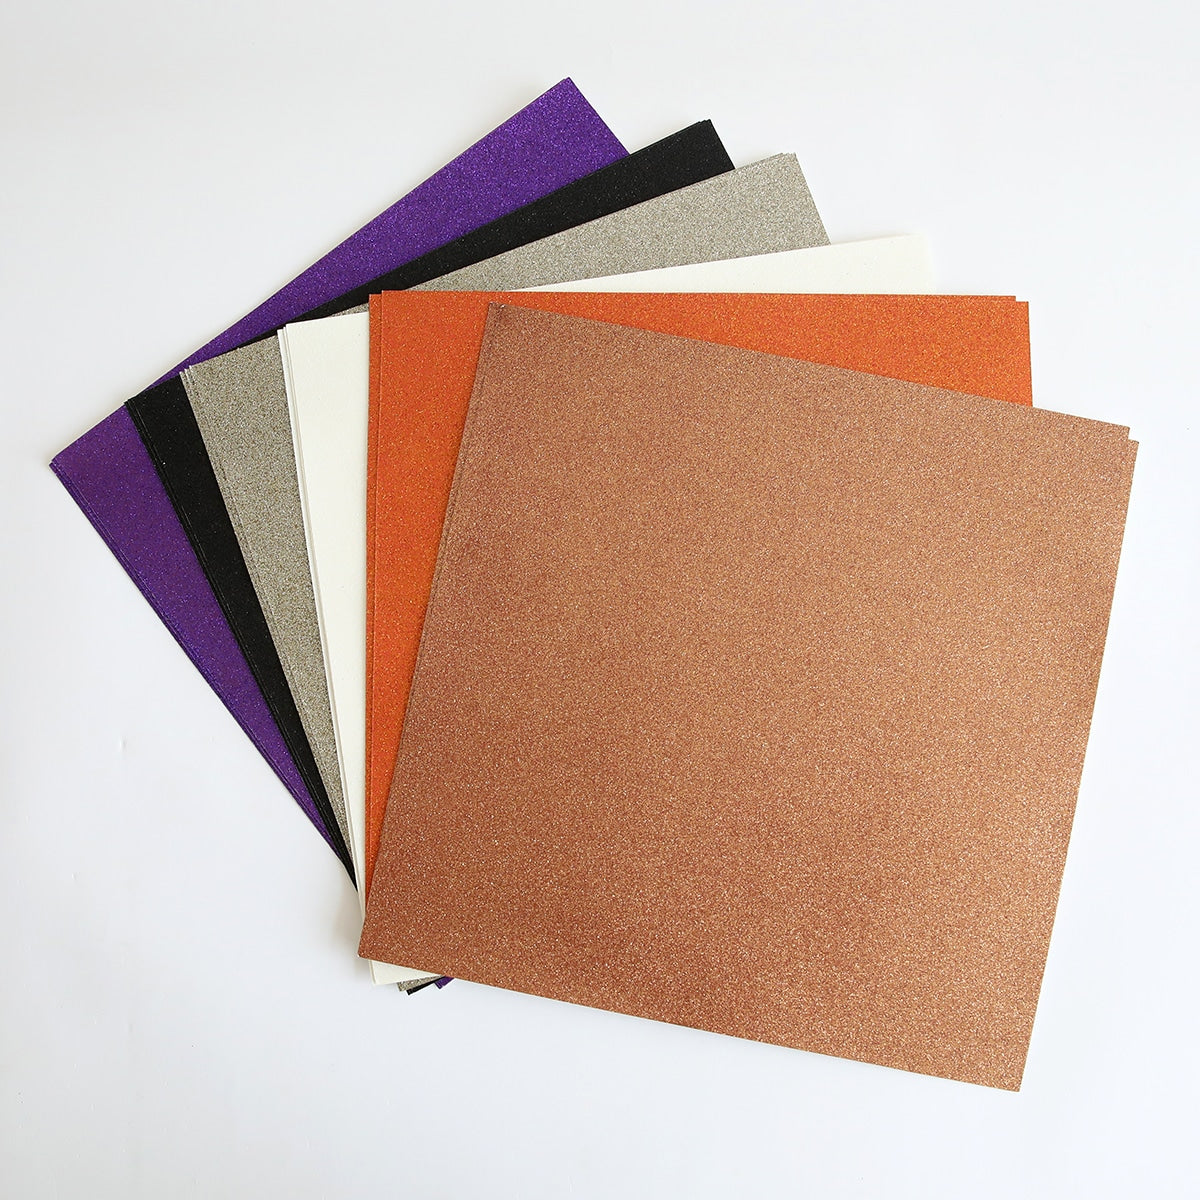 A group of Halloween 12x12 Glitter Cardstock papers on a white surface.